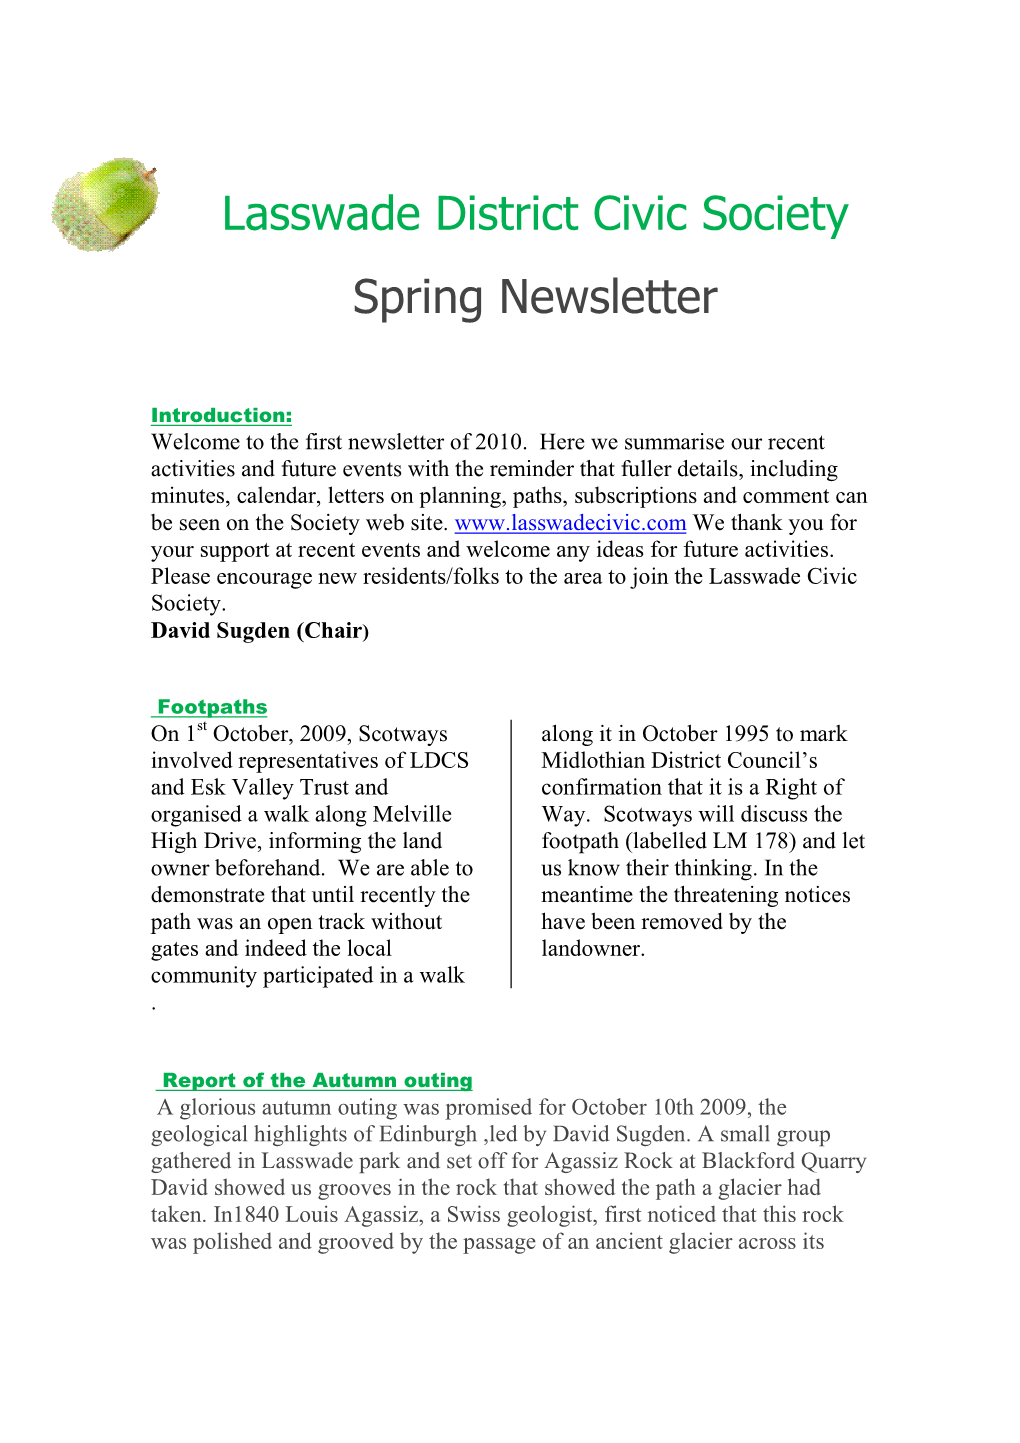 Lasswade District Civic Society Spring Newsletter